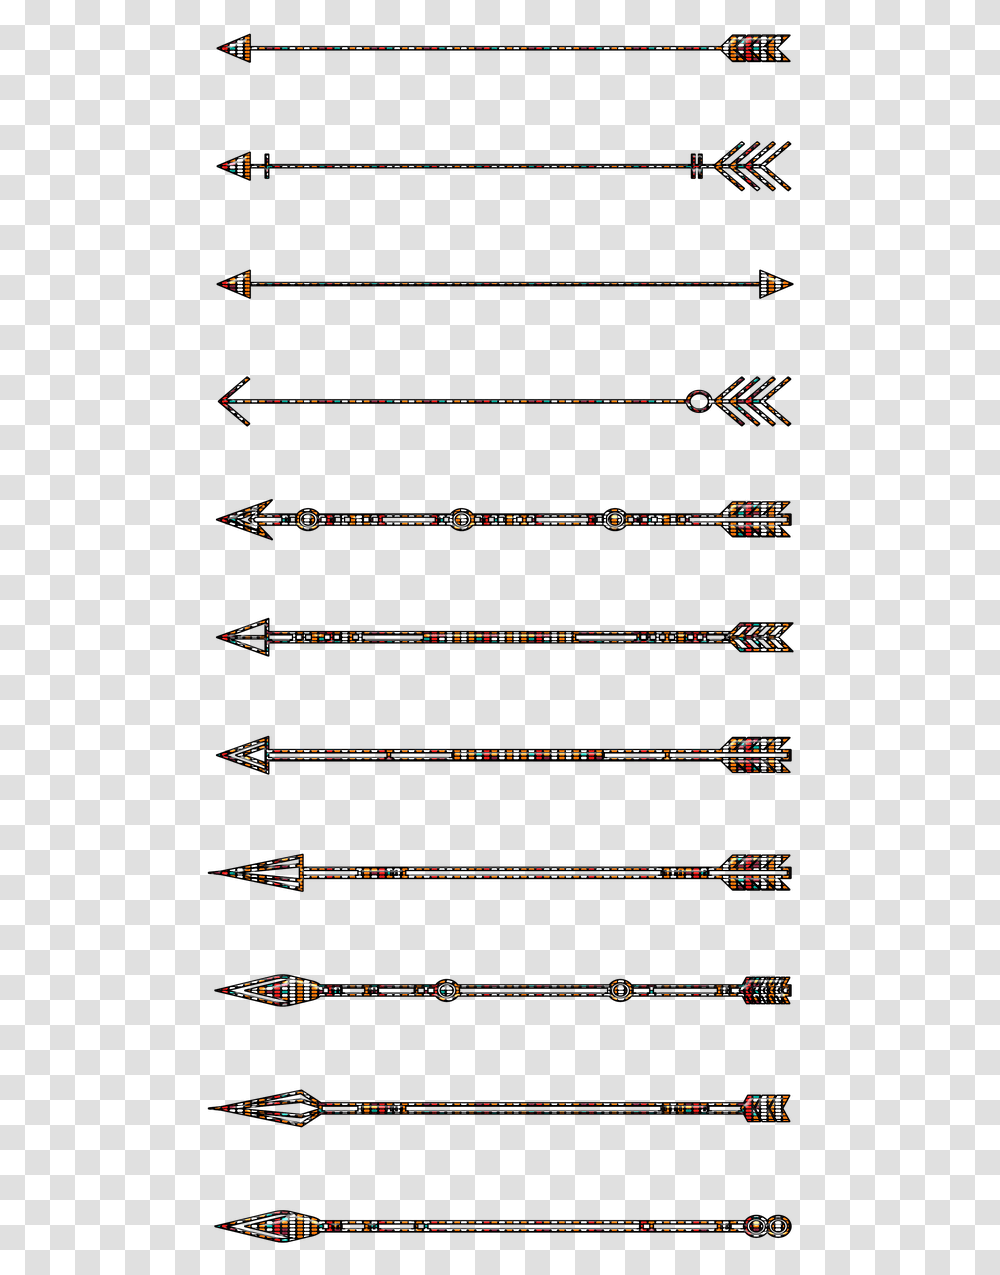 Tribal Arrows Native American Free Image On Pixabay American Indain Arrows, Symbol, Leisure Activities, Weapon, Weaponry Transparent Png